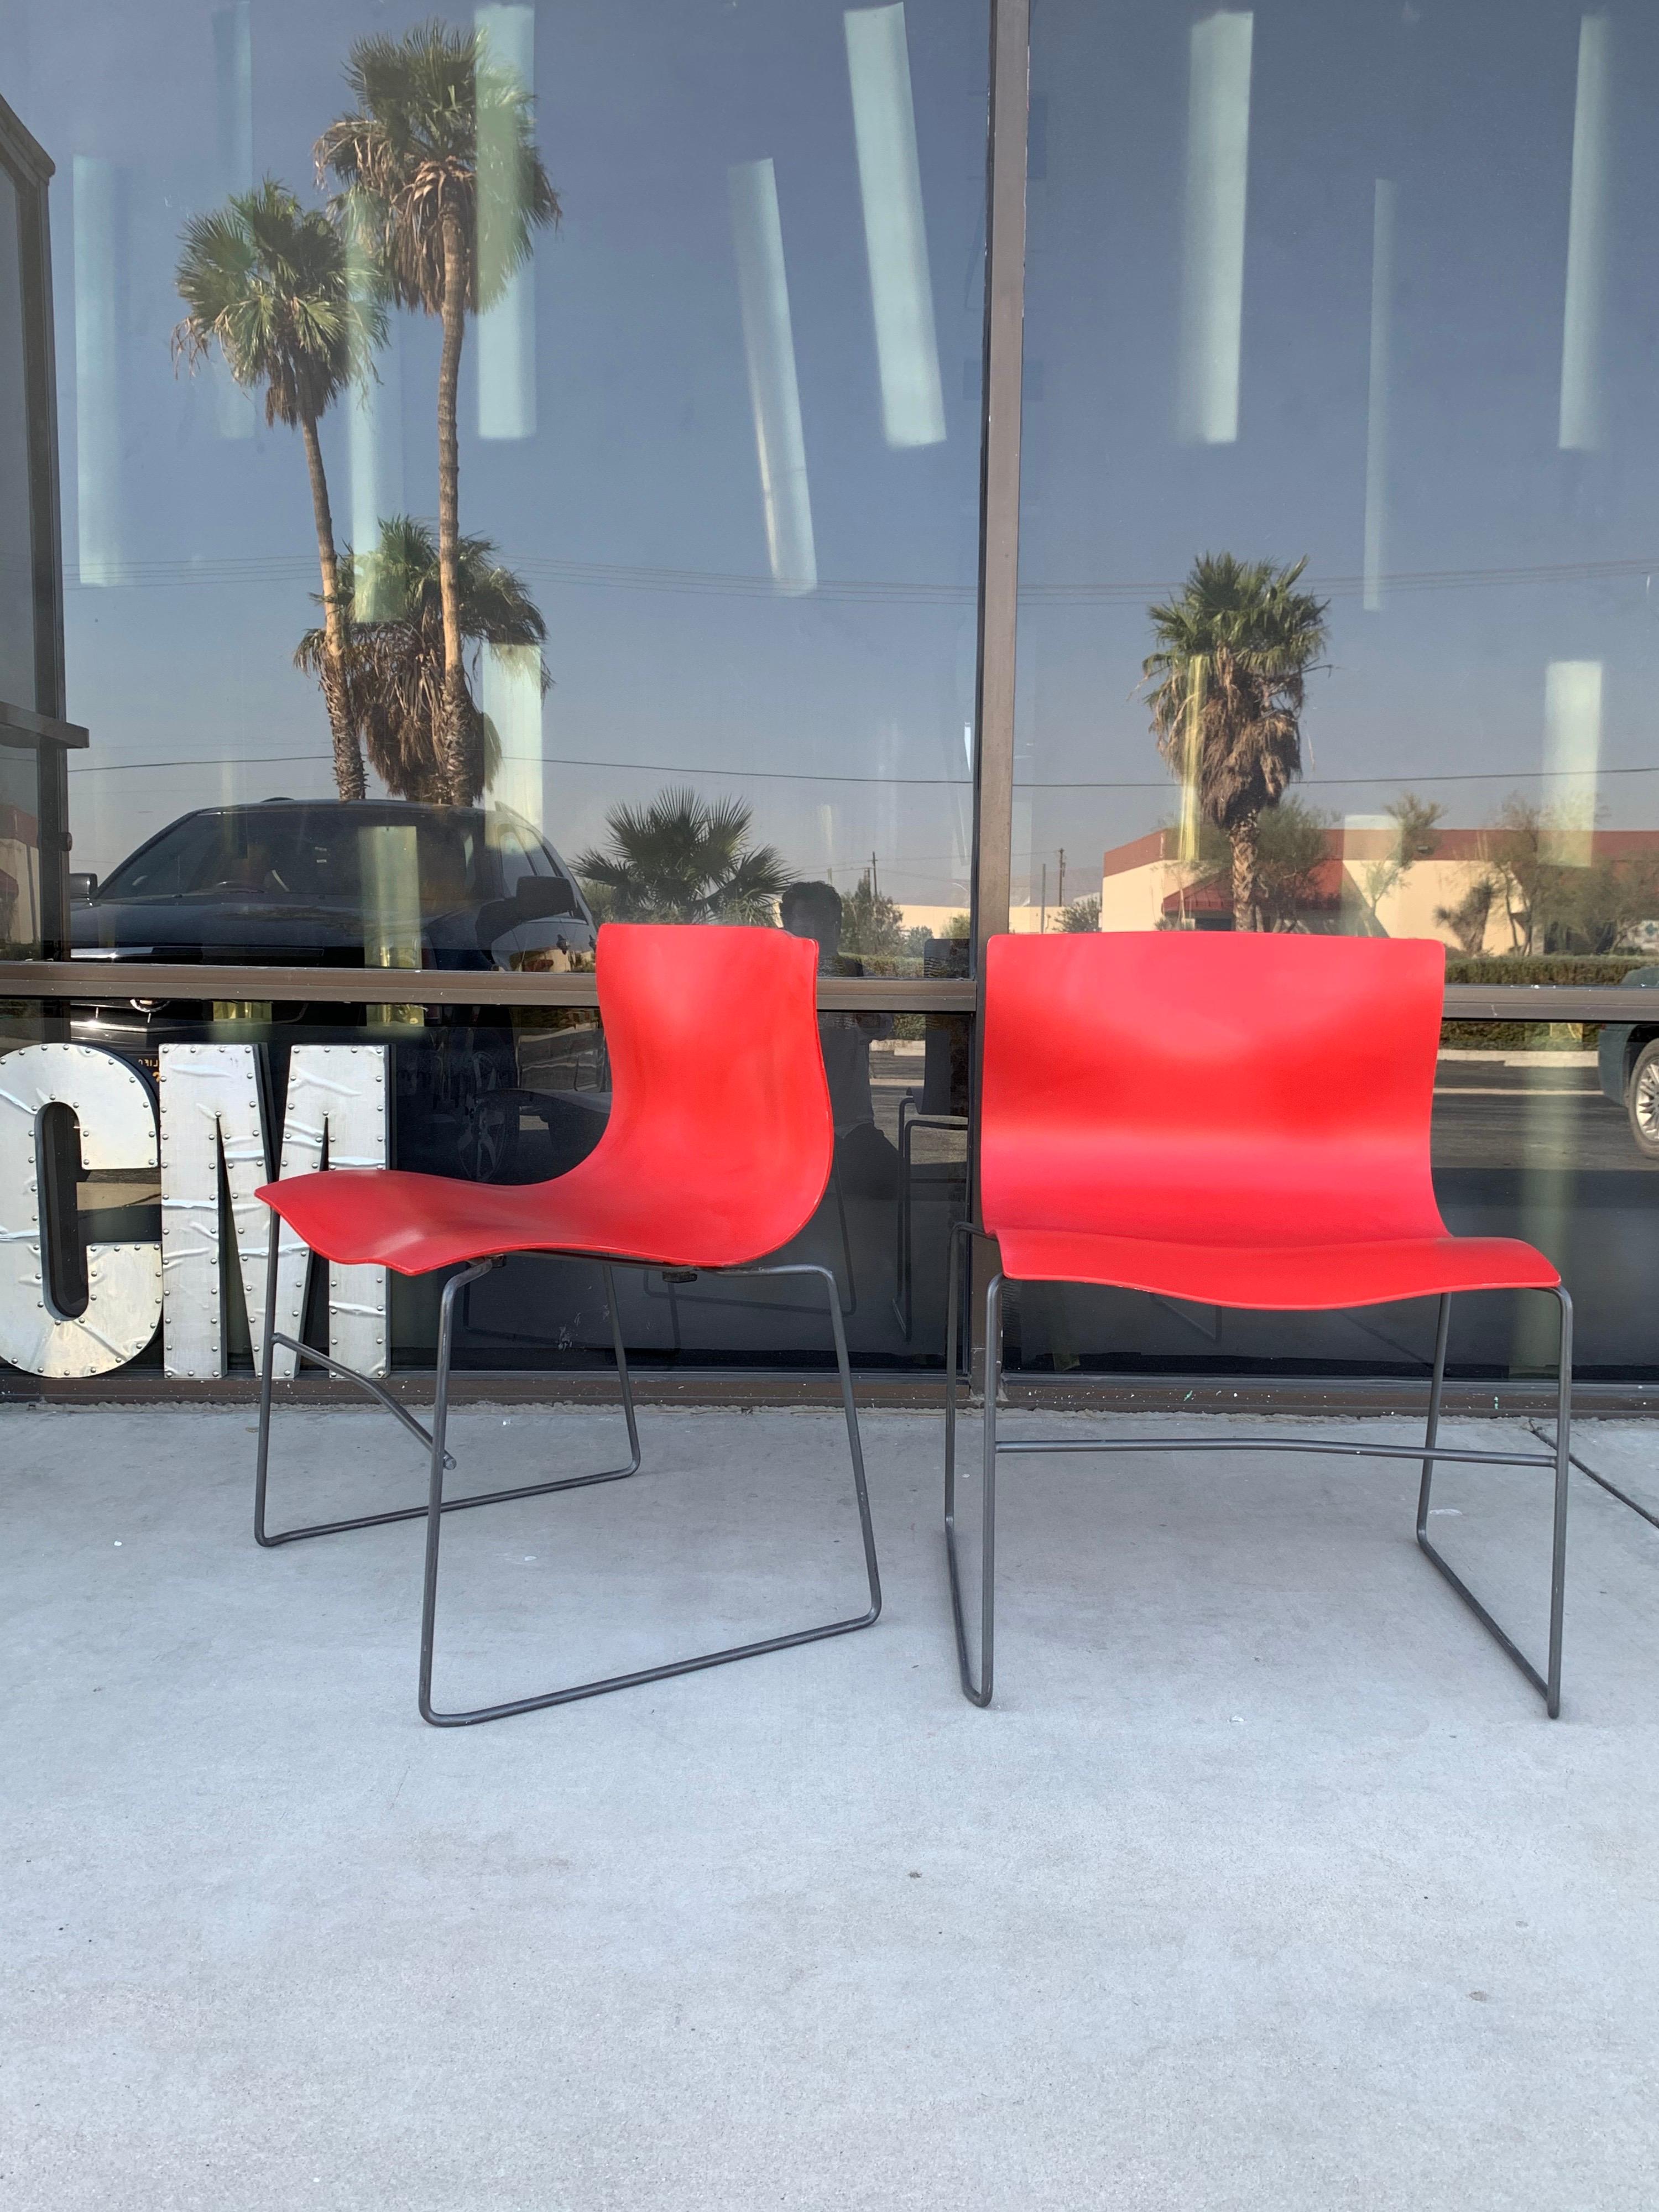 These pair of rare red handkerchief chairs made by Knoll and designed by Massimo Vignelli were made in 1985. Signed with metal plaque underneath. All original.